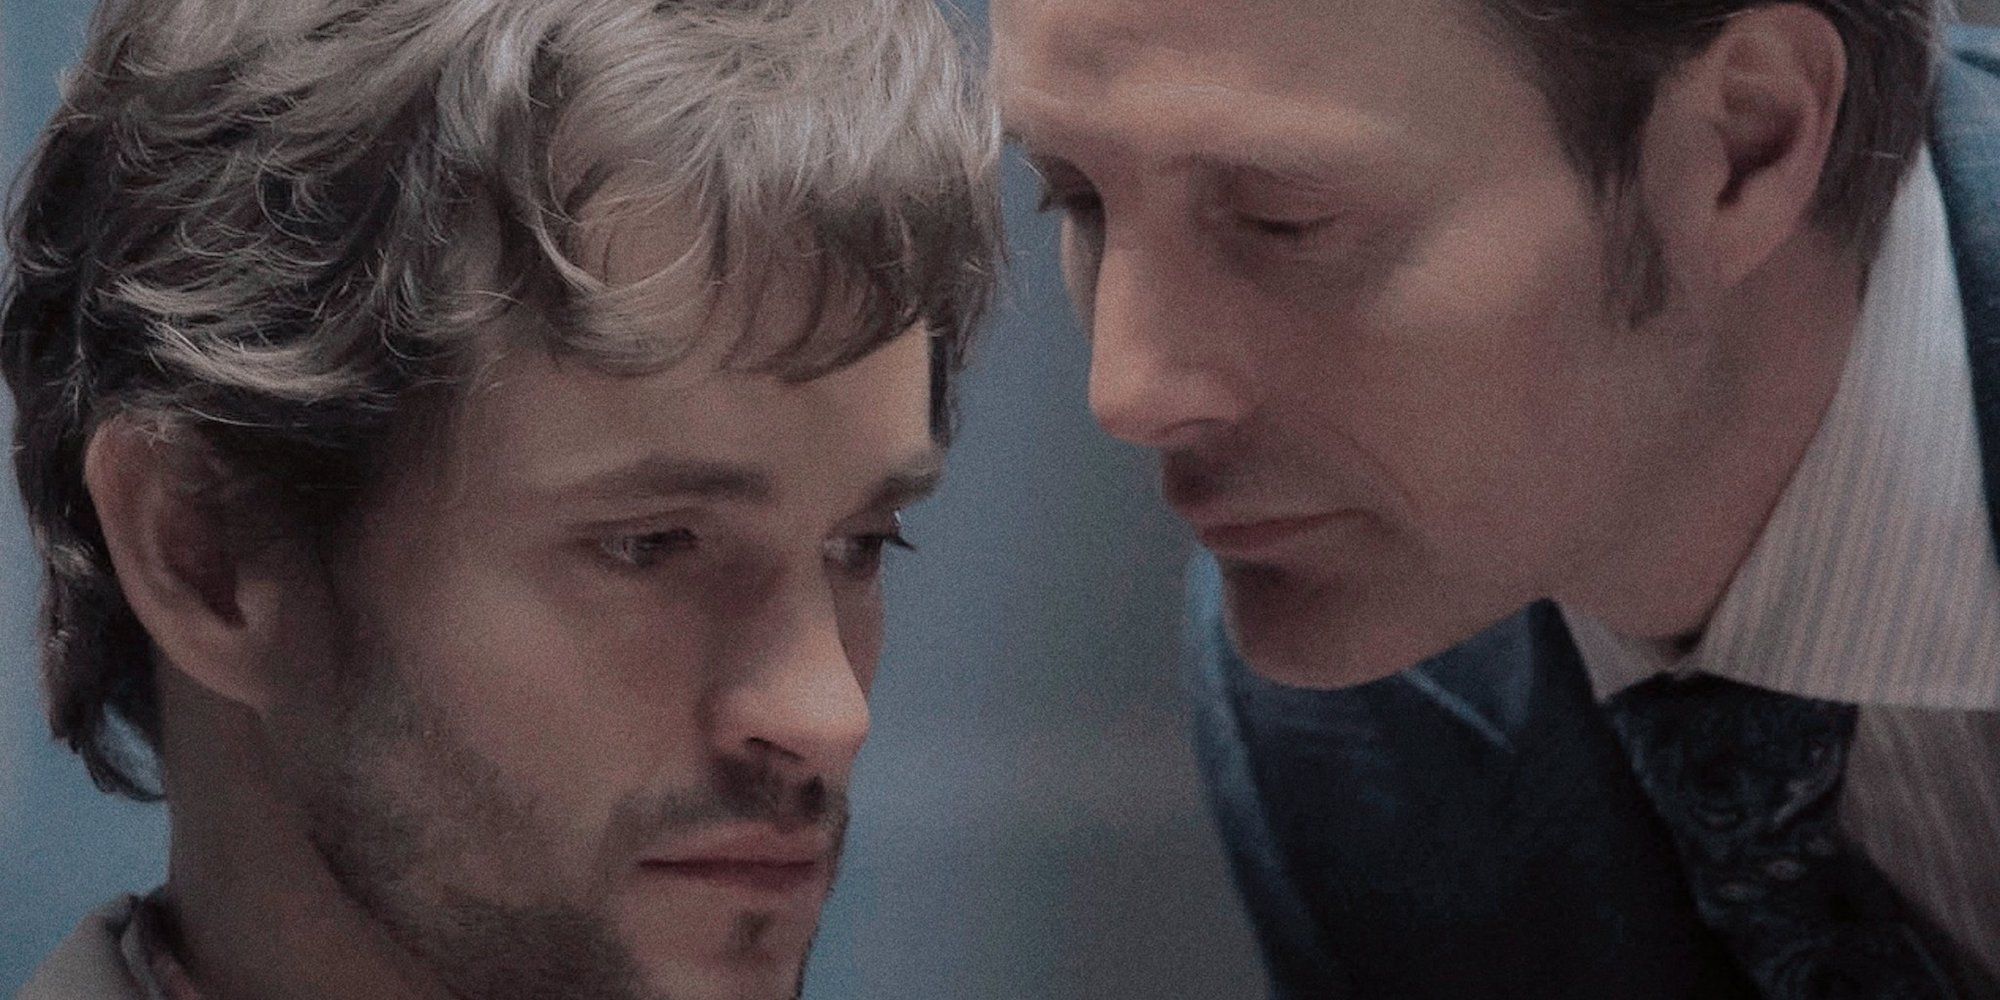 Hugh Dancy as Will Graham with Mads Mikkelsen as Hannibal leaning in to talk to him Lecter in Hannibal